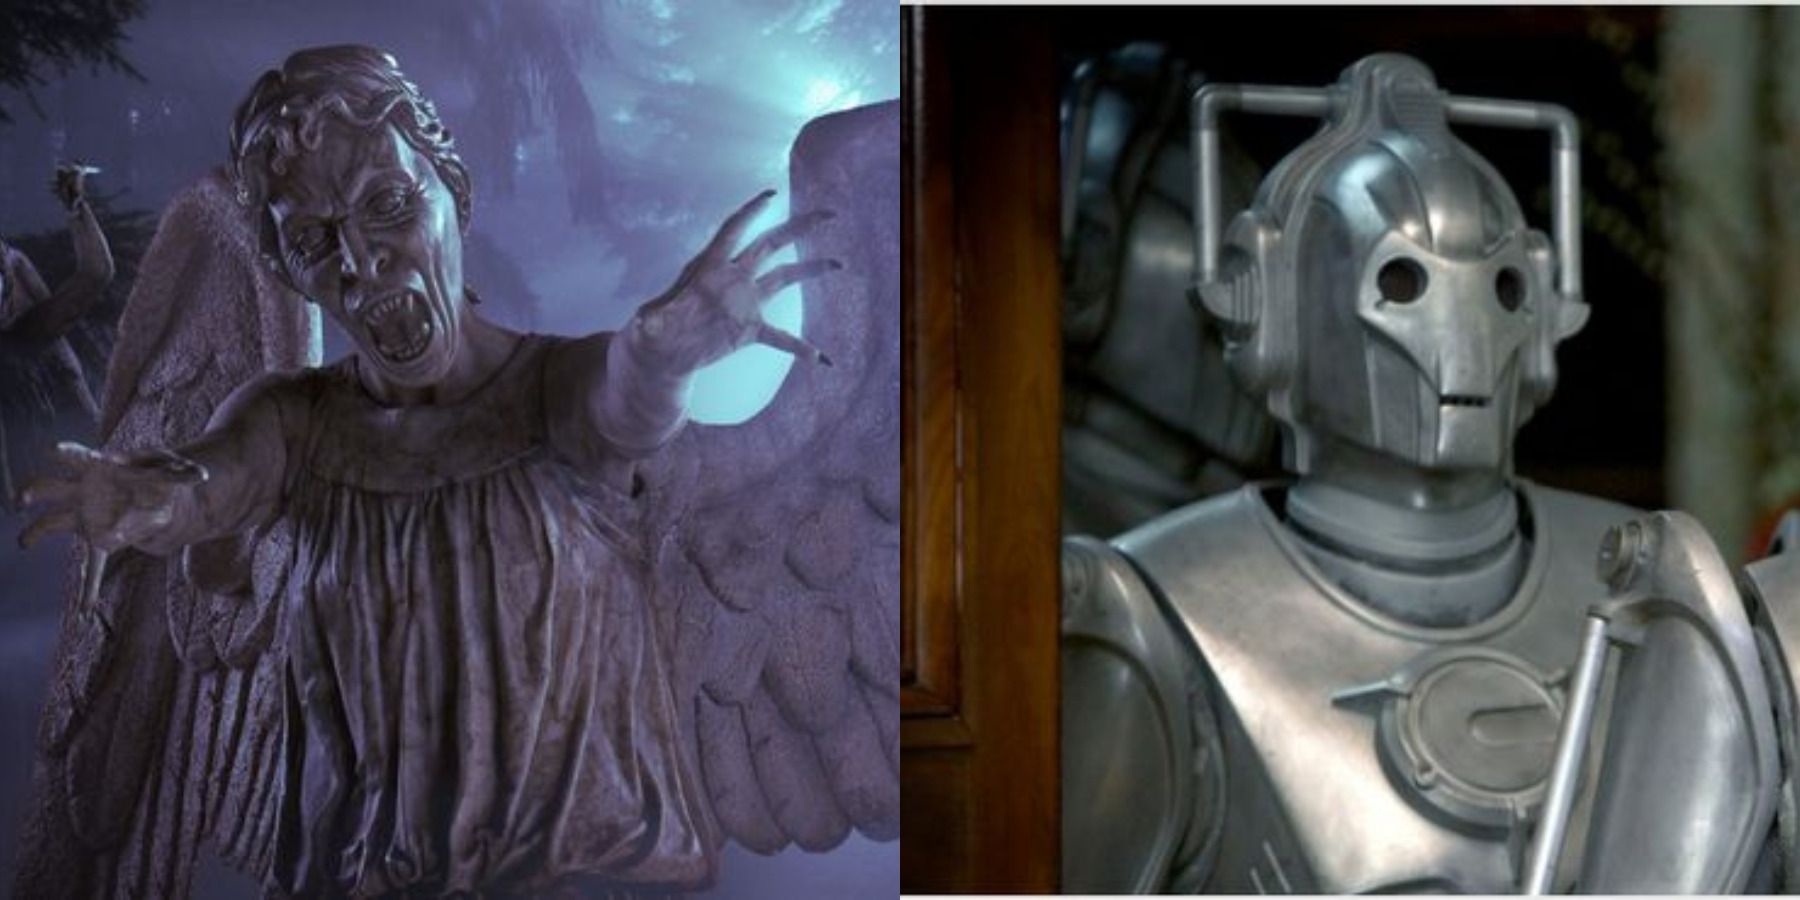 Doctor Who villains feature split image Weeping Angels and Cybermen